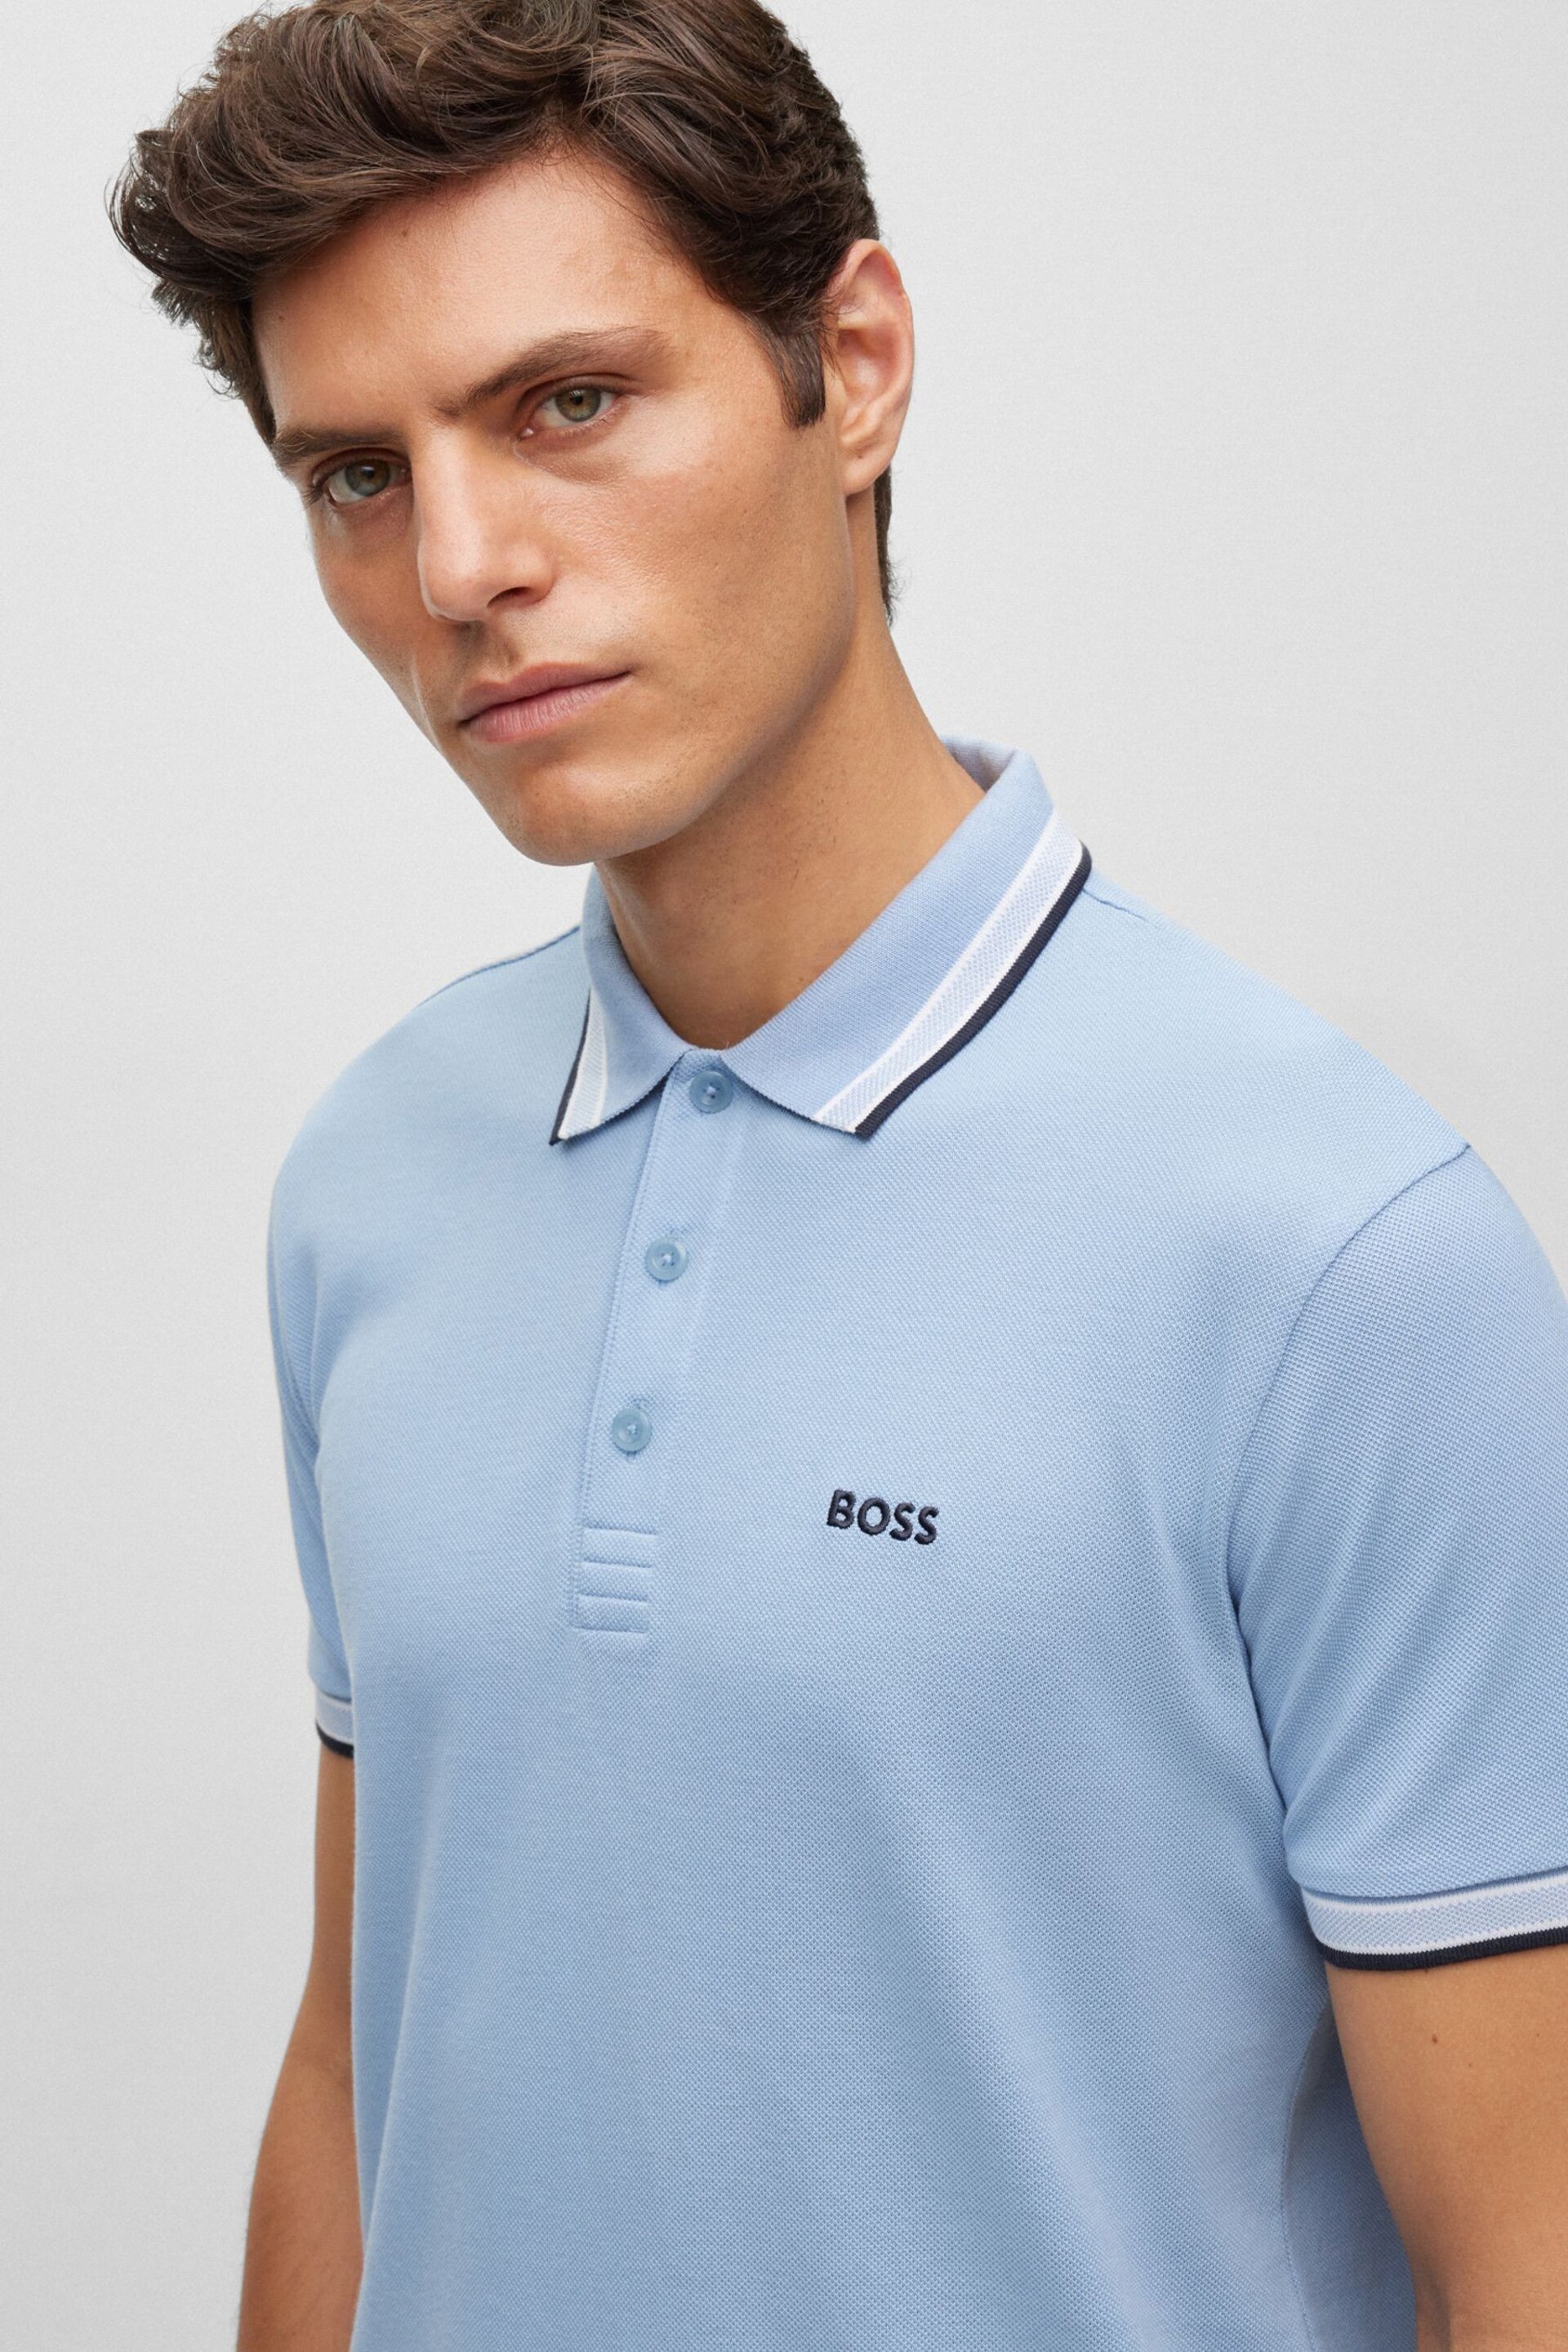 BOSS Sky Blue/Black Tipping Paddy Polo Shirt - Image 4 of 5